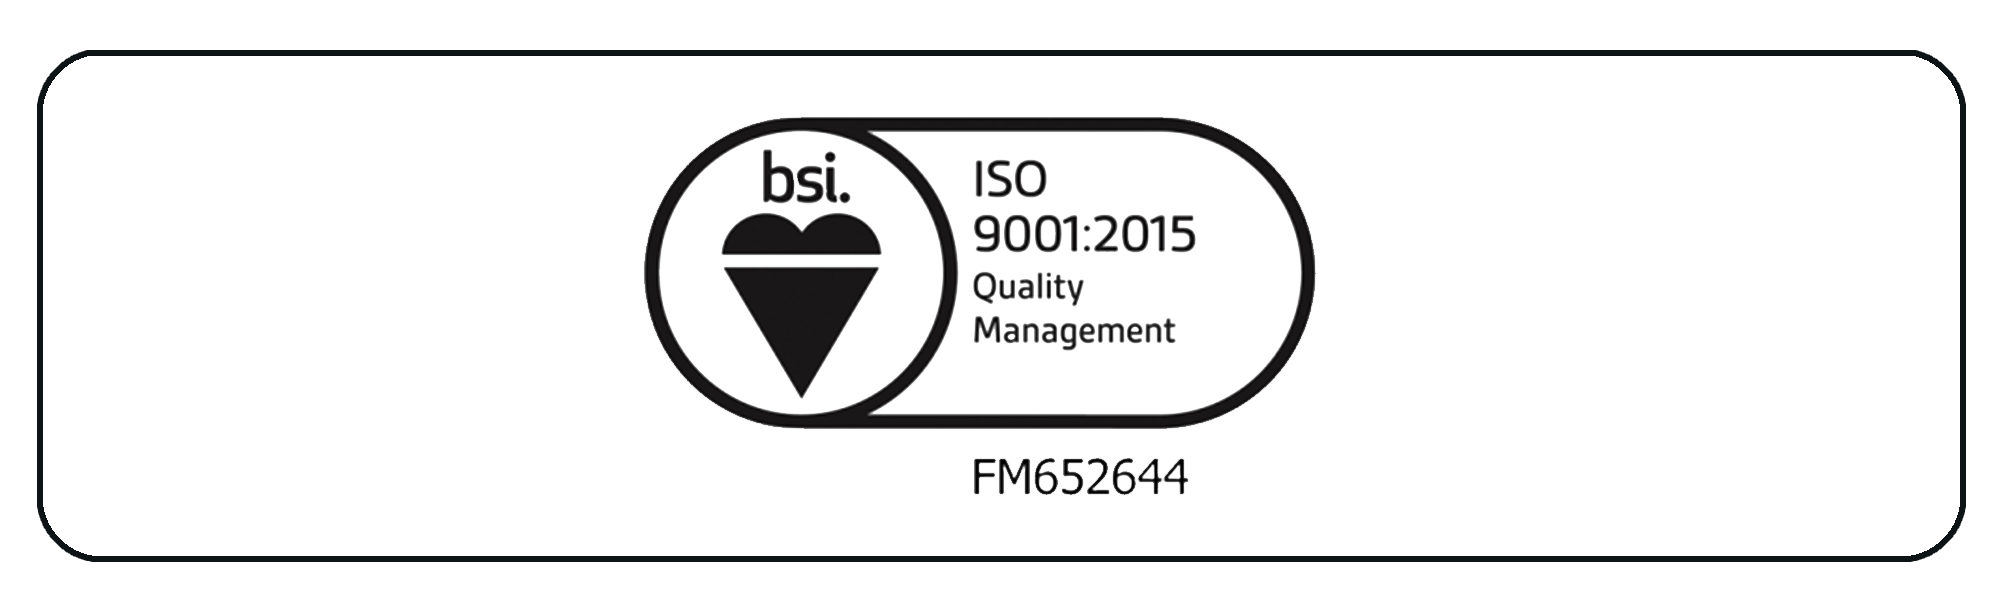 bsi quality management iso 9001:2015 banner